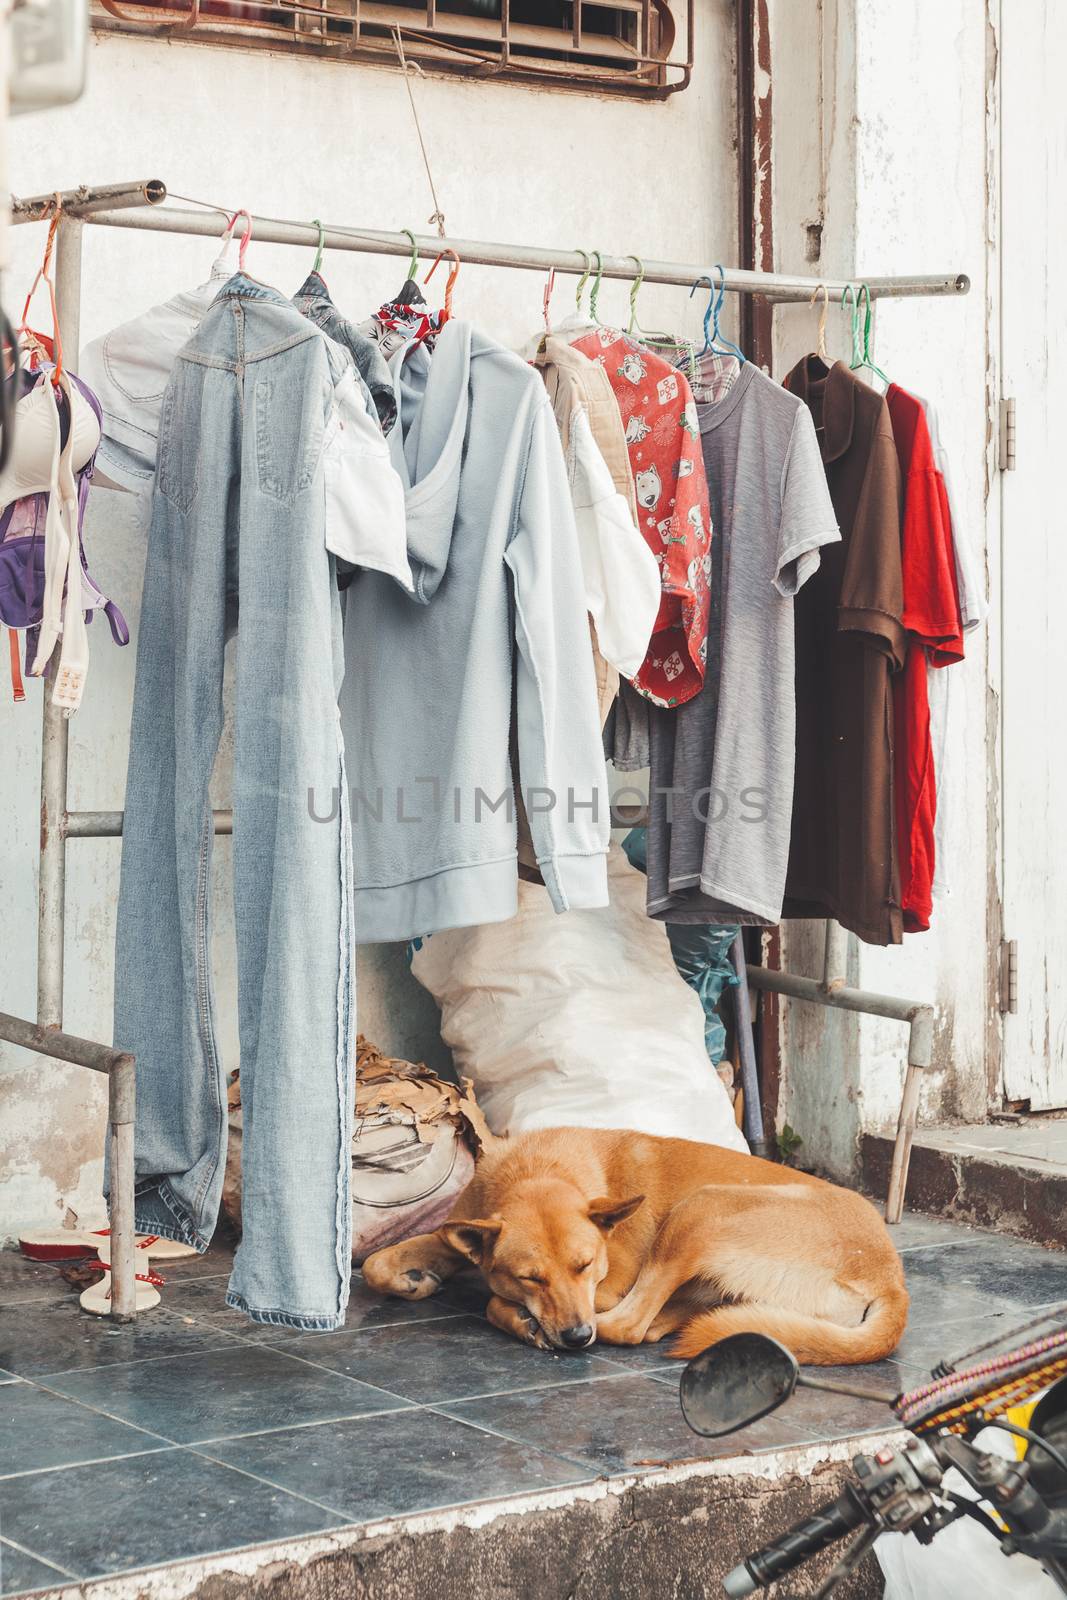 Stray ginger dog sleeps on pavement under hanger with washed clo by aksenovko